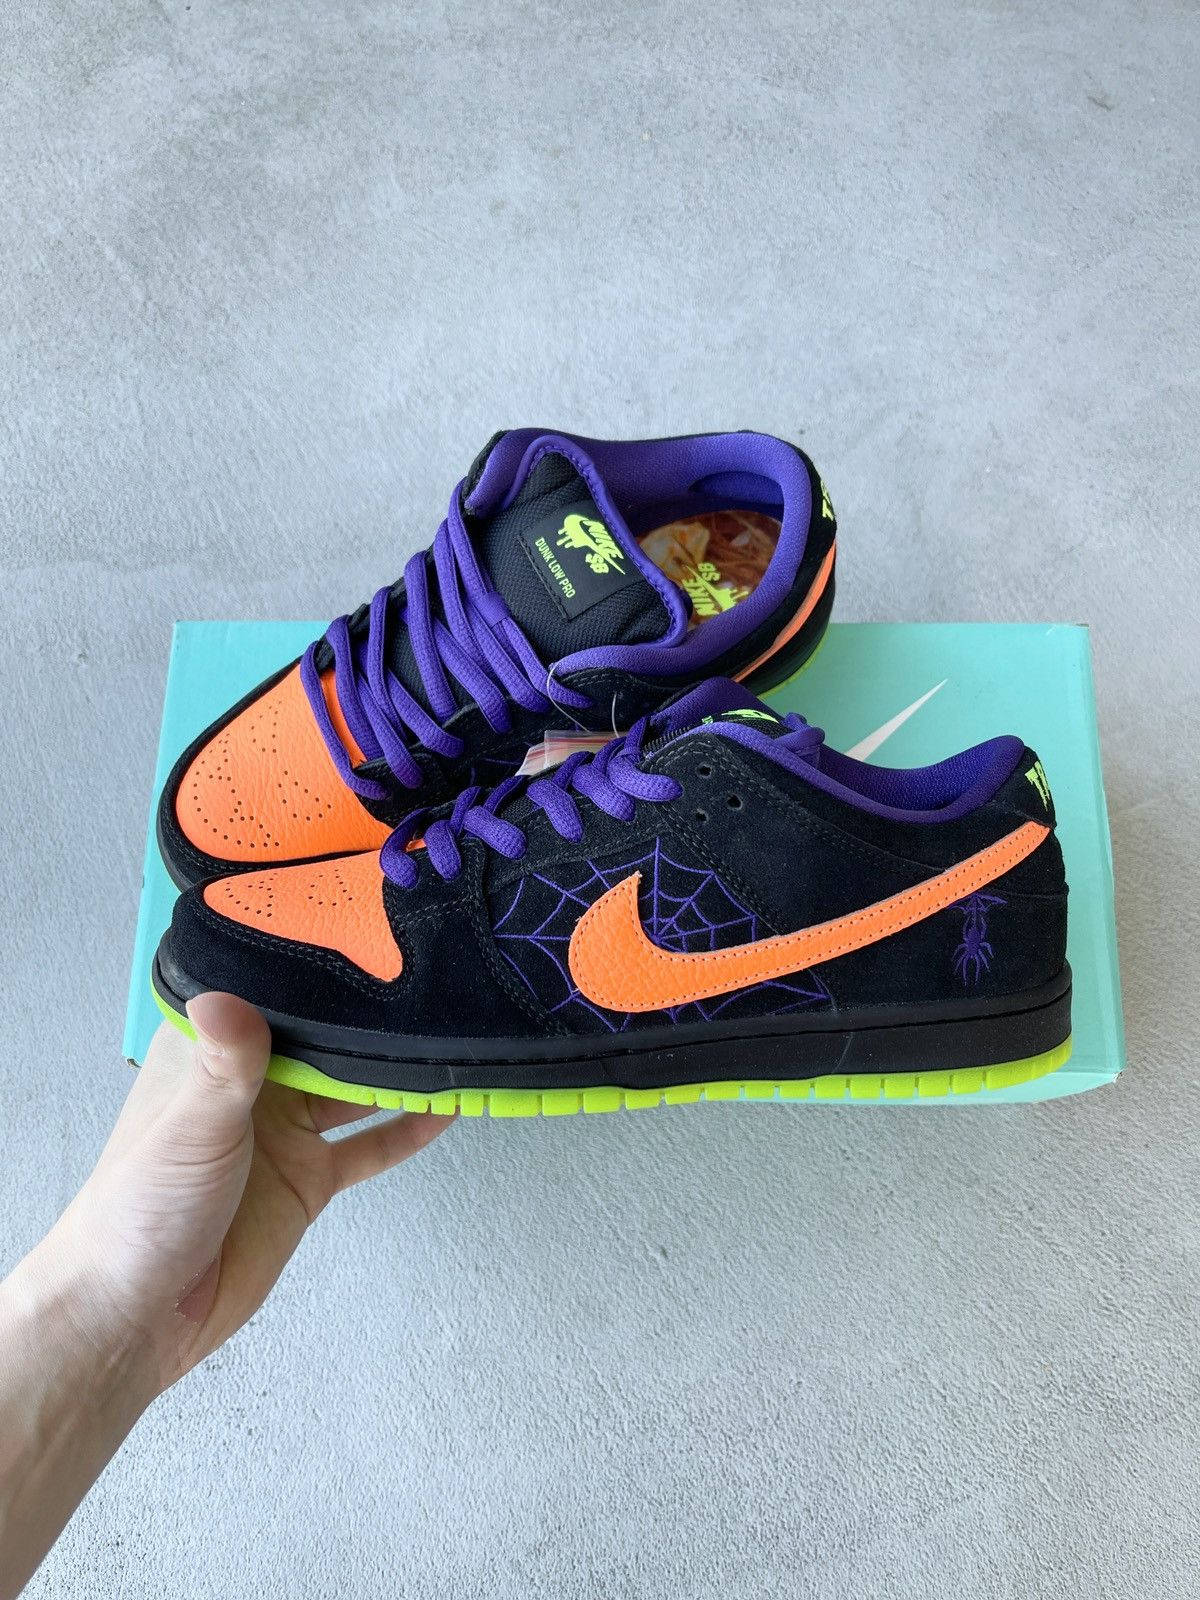 2019 Nike Dunk SB Low “Night of Mischeif” - Size 7 - 1